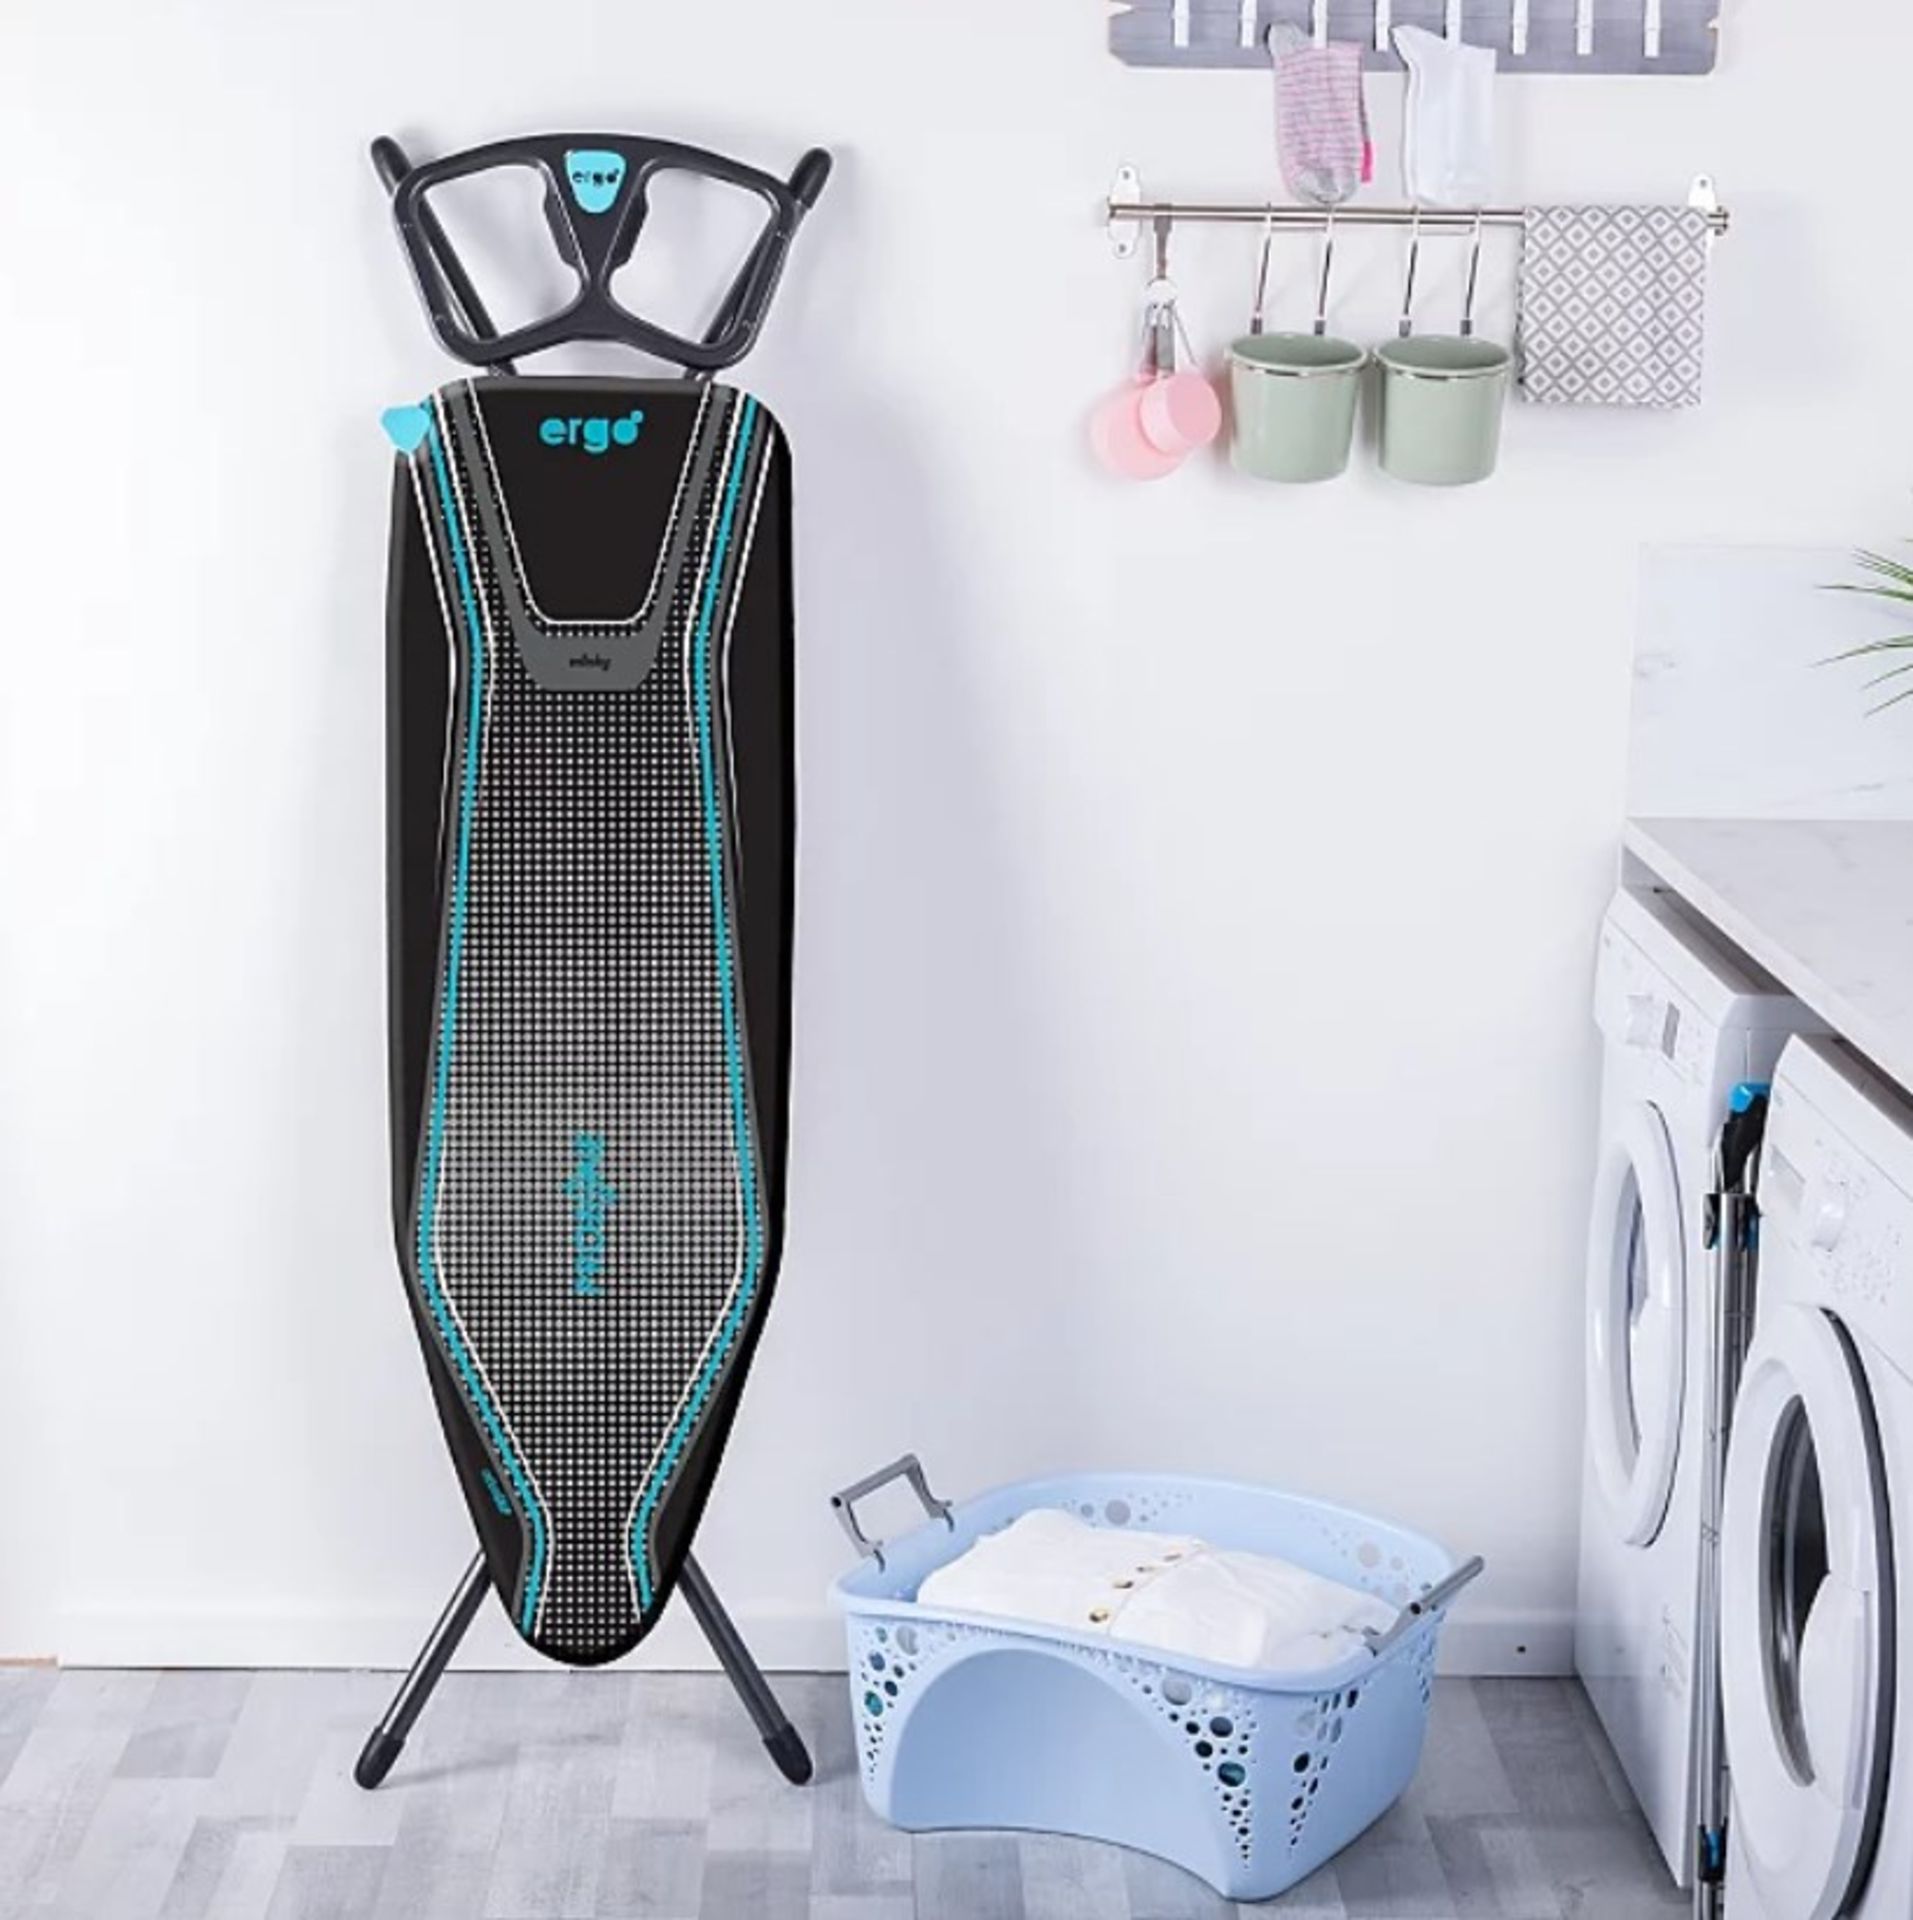 Description: (150/R3) Lot RRP £192 4x Minky Ergo Ironing Board RRP £48 Each This auction features